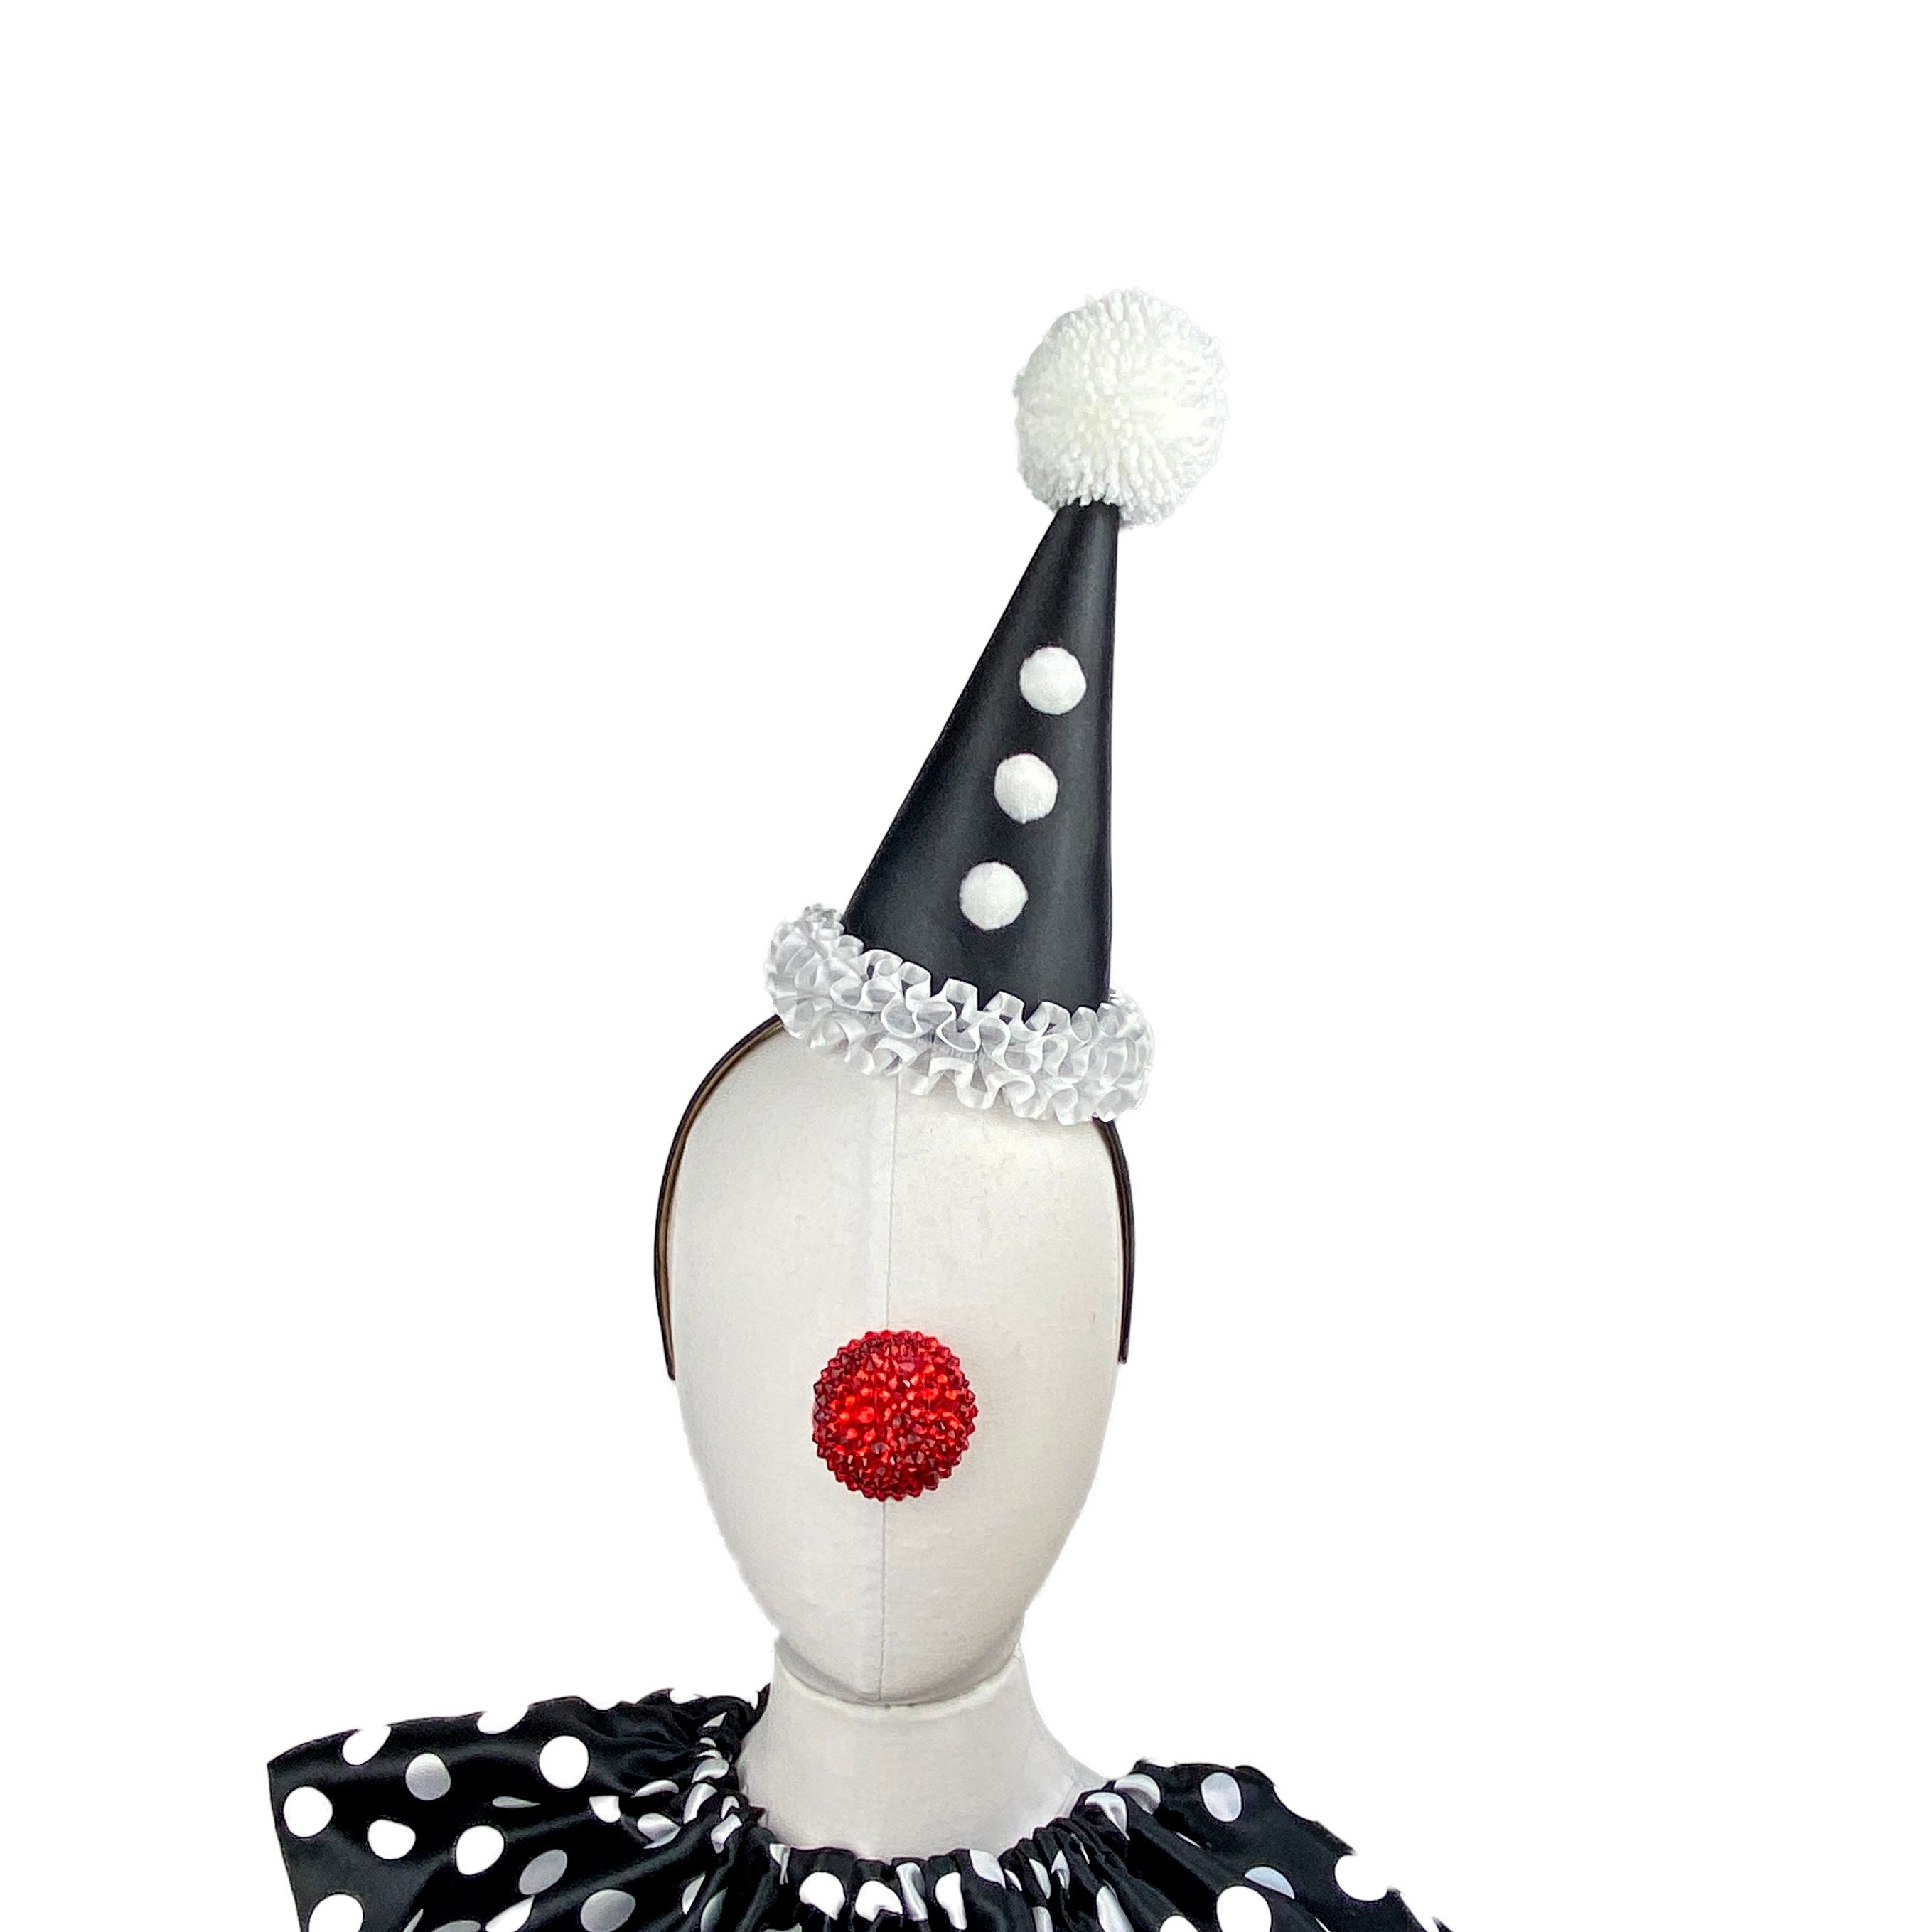 Black Clown Hat With White Ruffle Scary Clown Costume Cirque pic pic